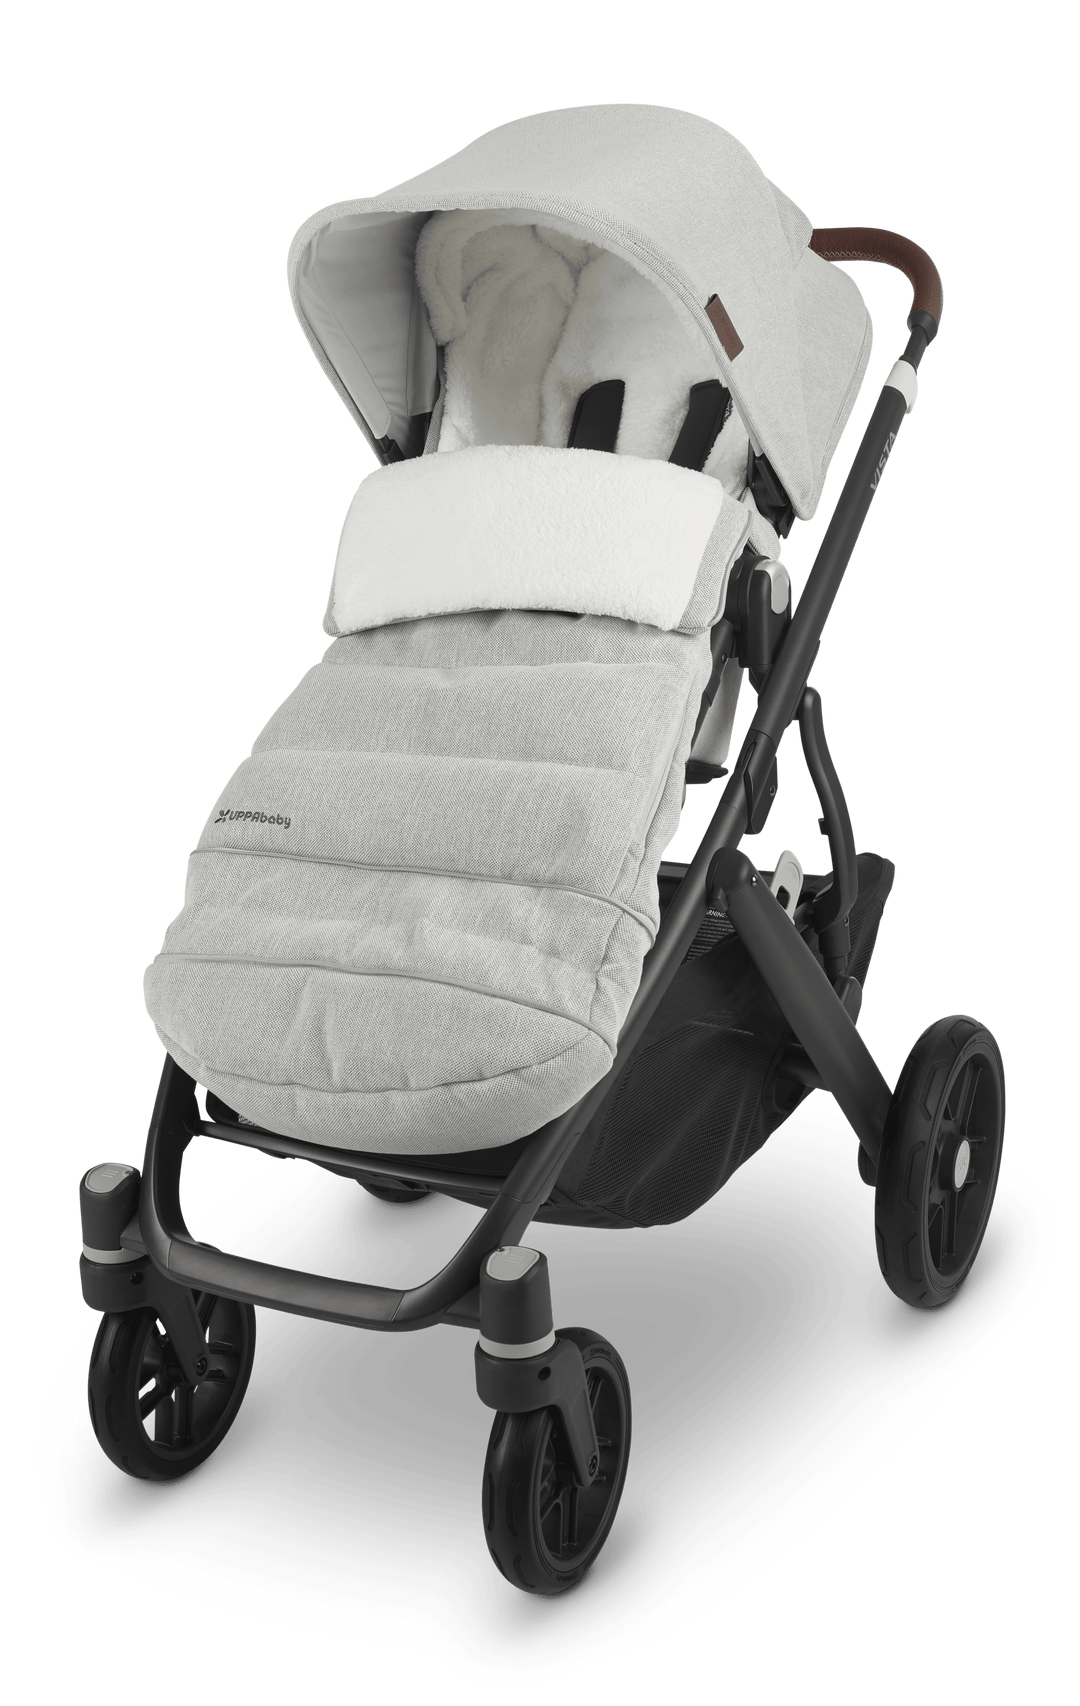 UPPAbaby CozyGanoosh for Strollers